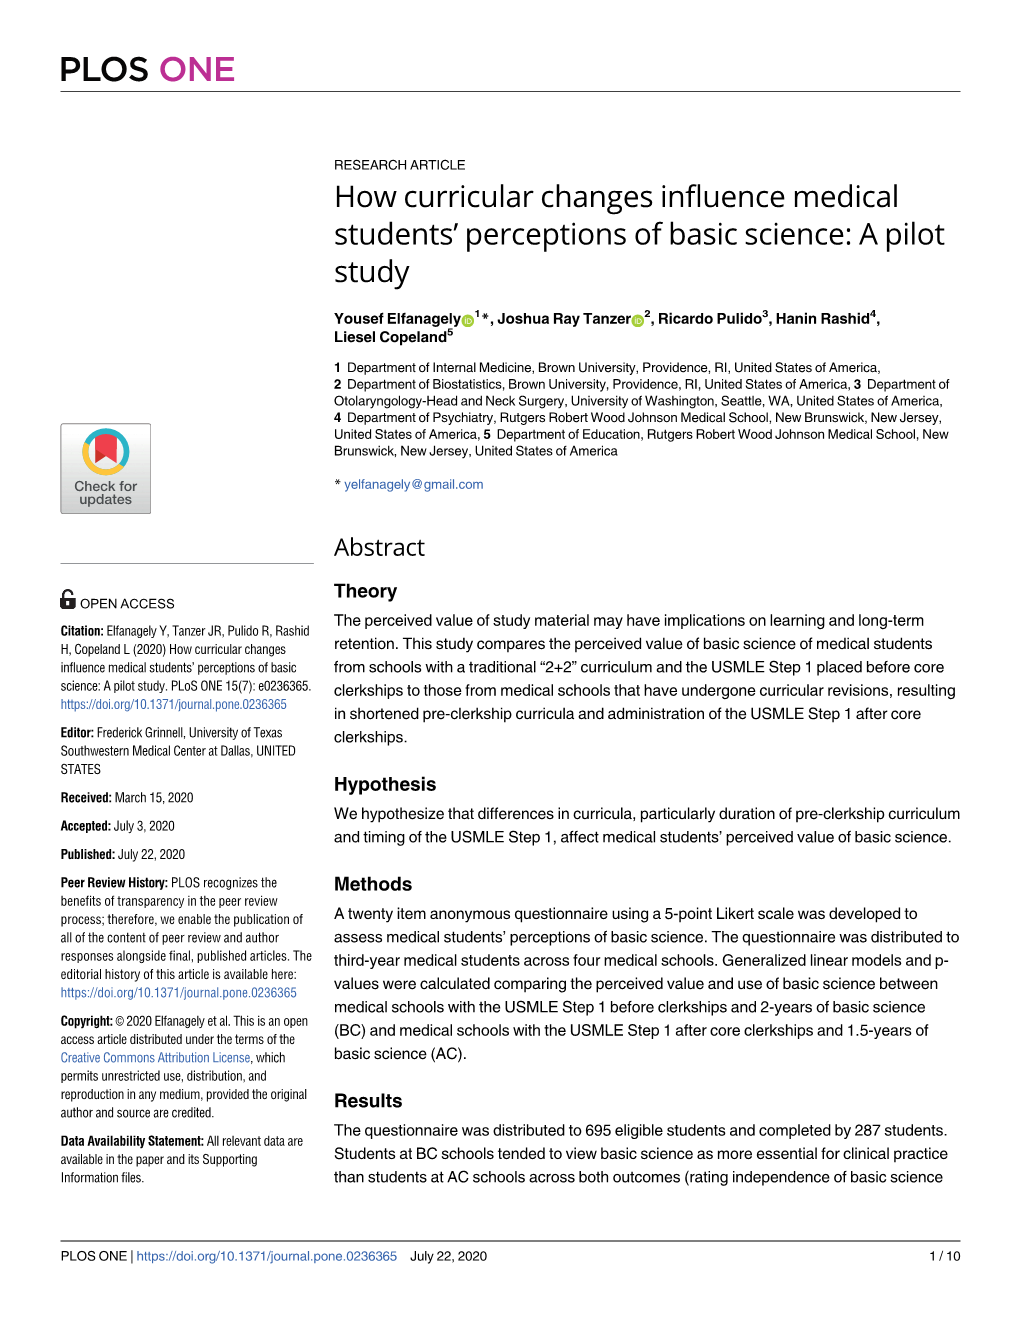 How Curricular Changes Influence Medical Students' Perceptions of Basic Science: a Pilot Study